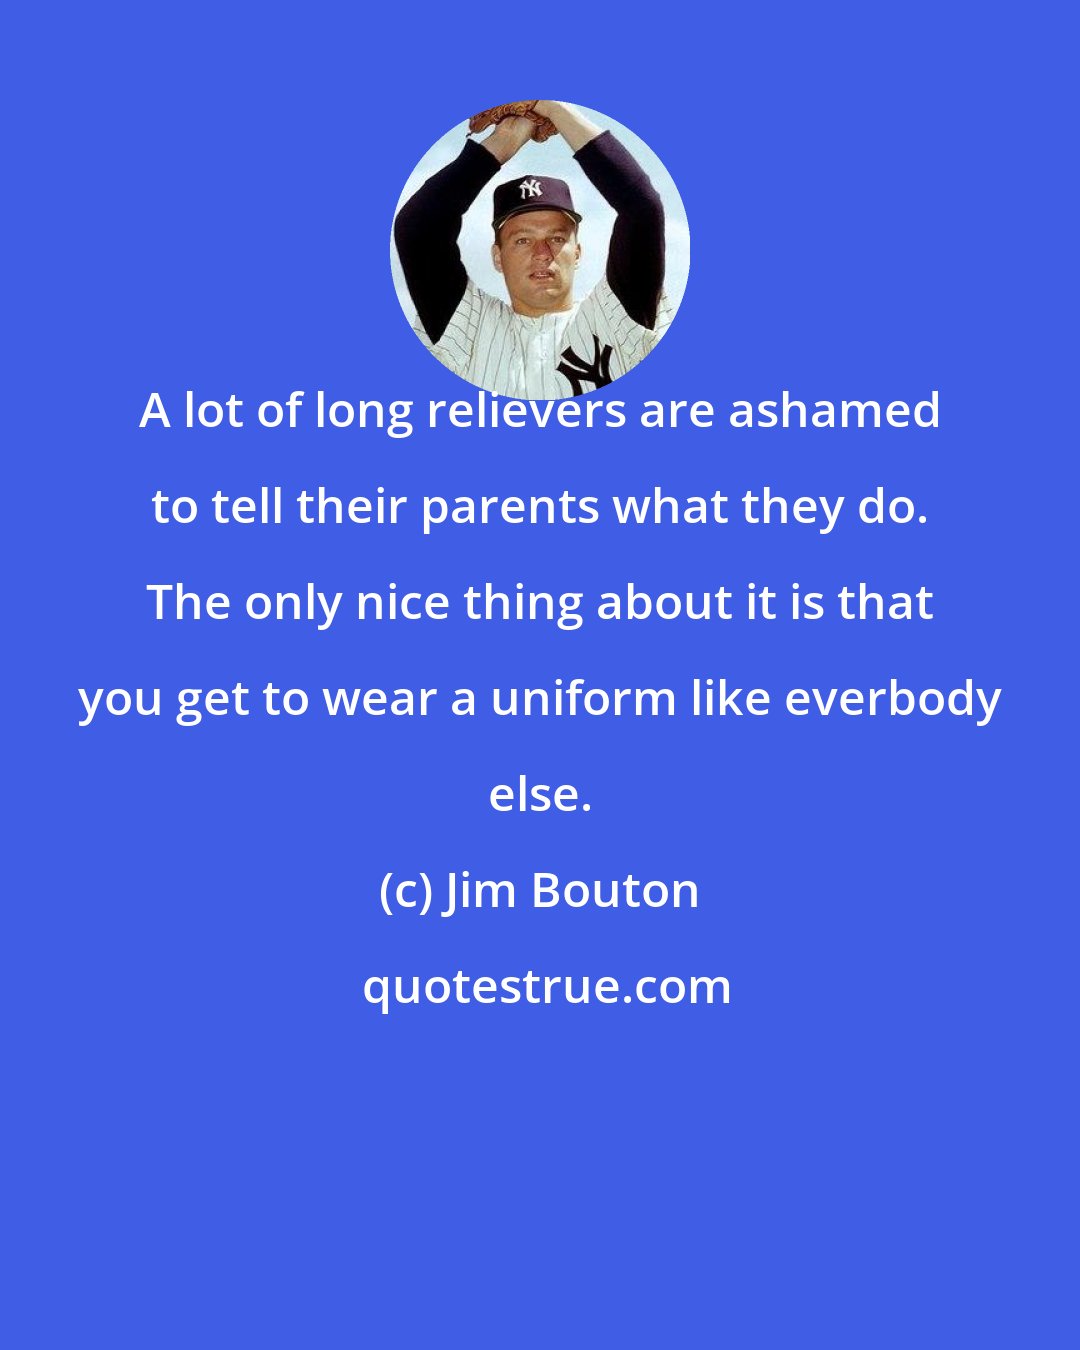 Jim Bouton: A lot of long relievers are ashamed to tell their parents what they do. The only nice thing about it is that you get to wear a uniform like everbody else.